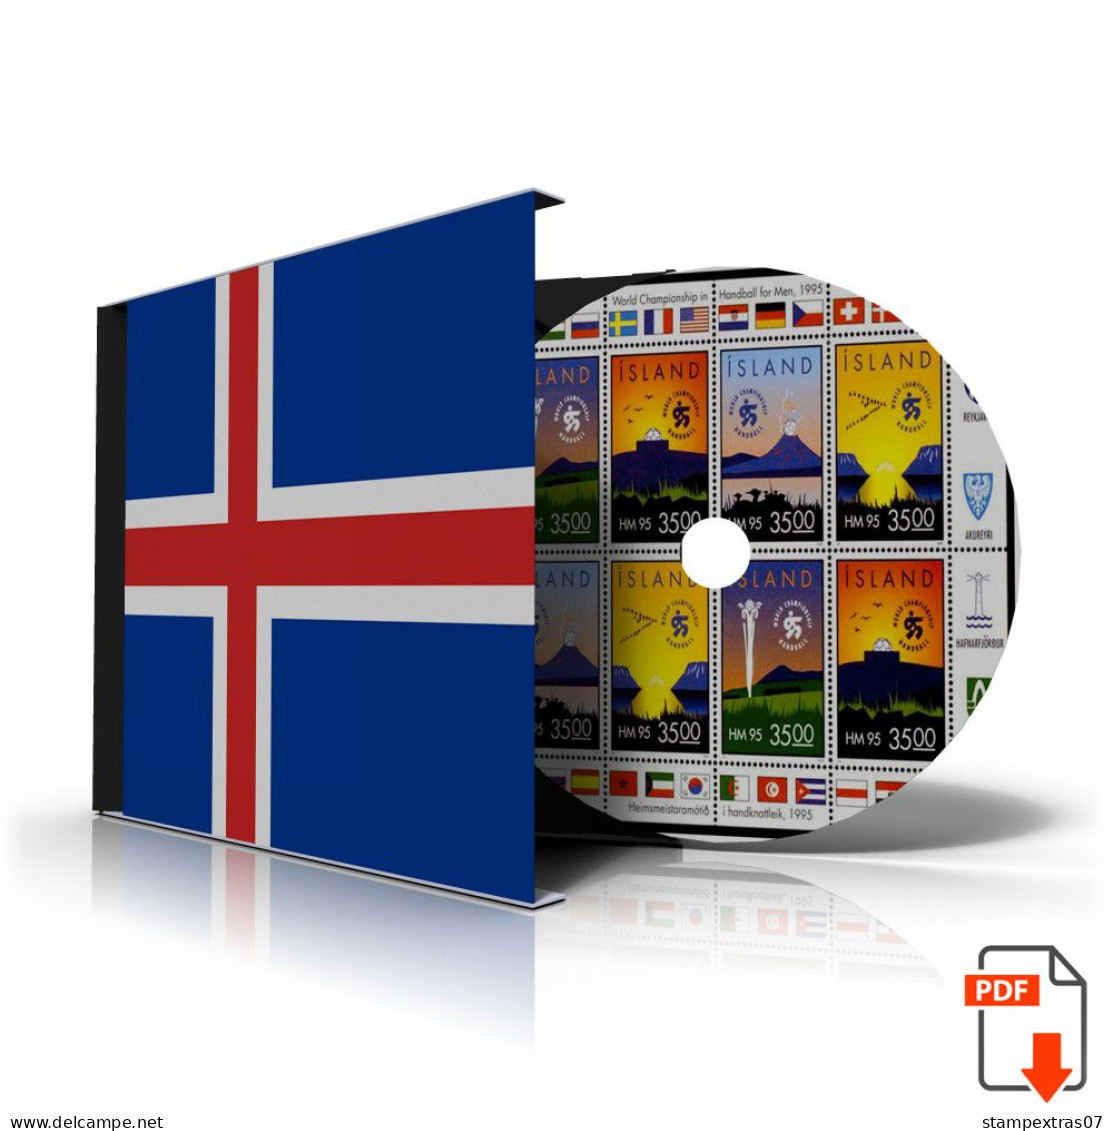 ICELAND STAMP ALBUM PAGES 1873-2011 (159 Color Illustrated Pages) - Anglais